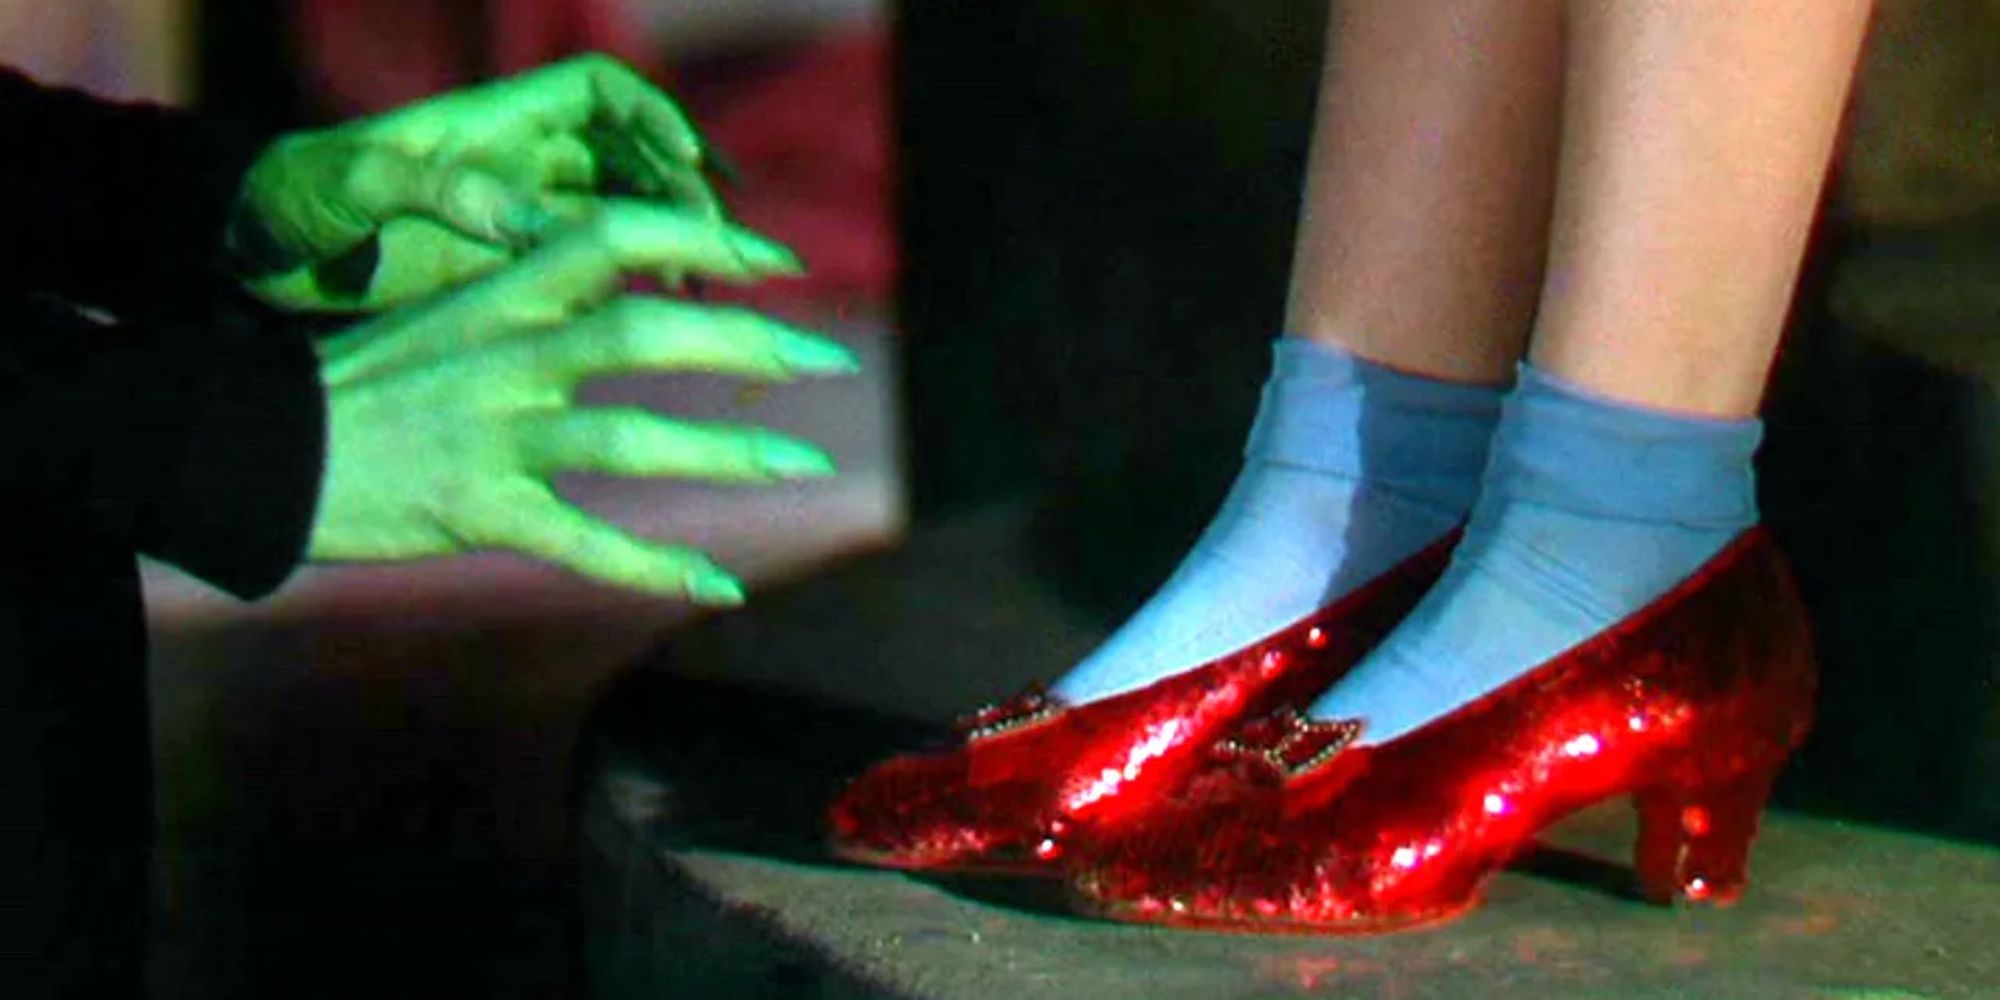 The Wicked Witch of the West reaches greedily for the ruby slippers